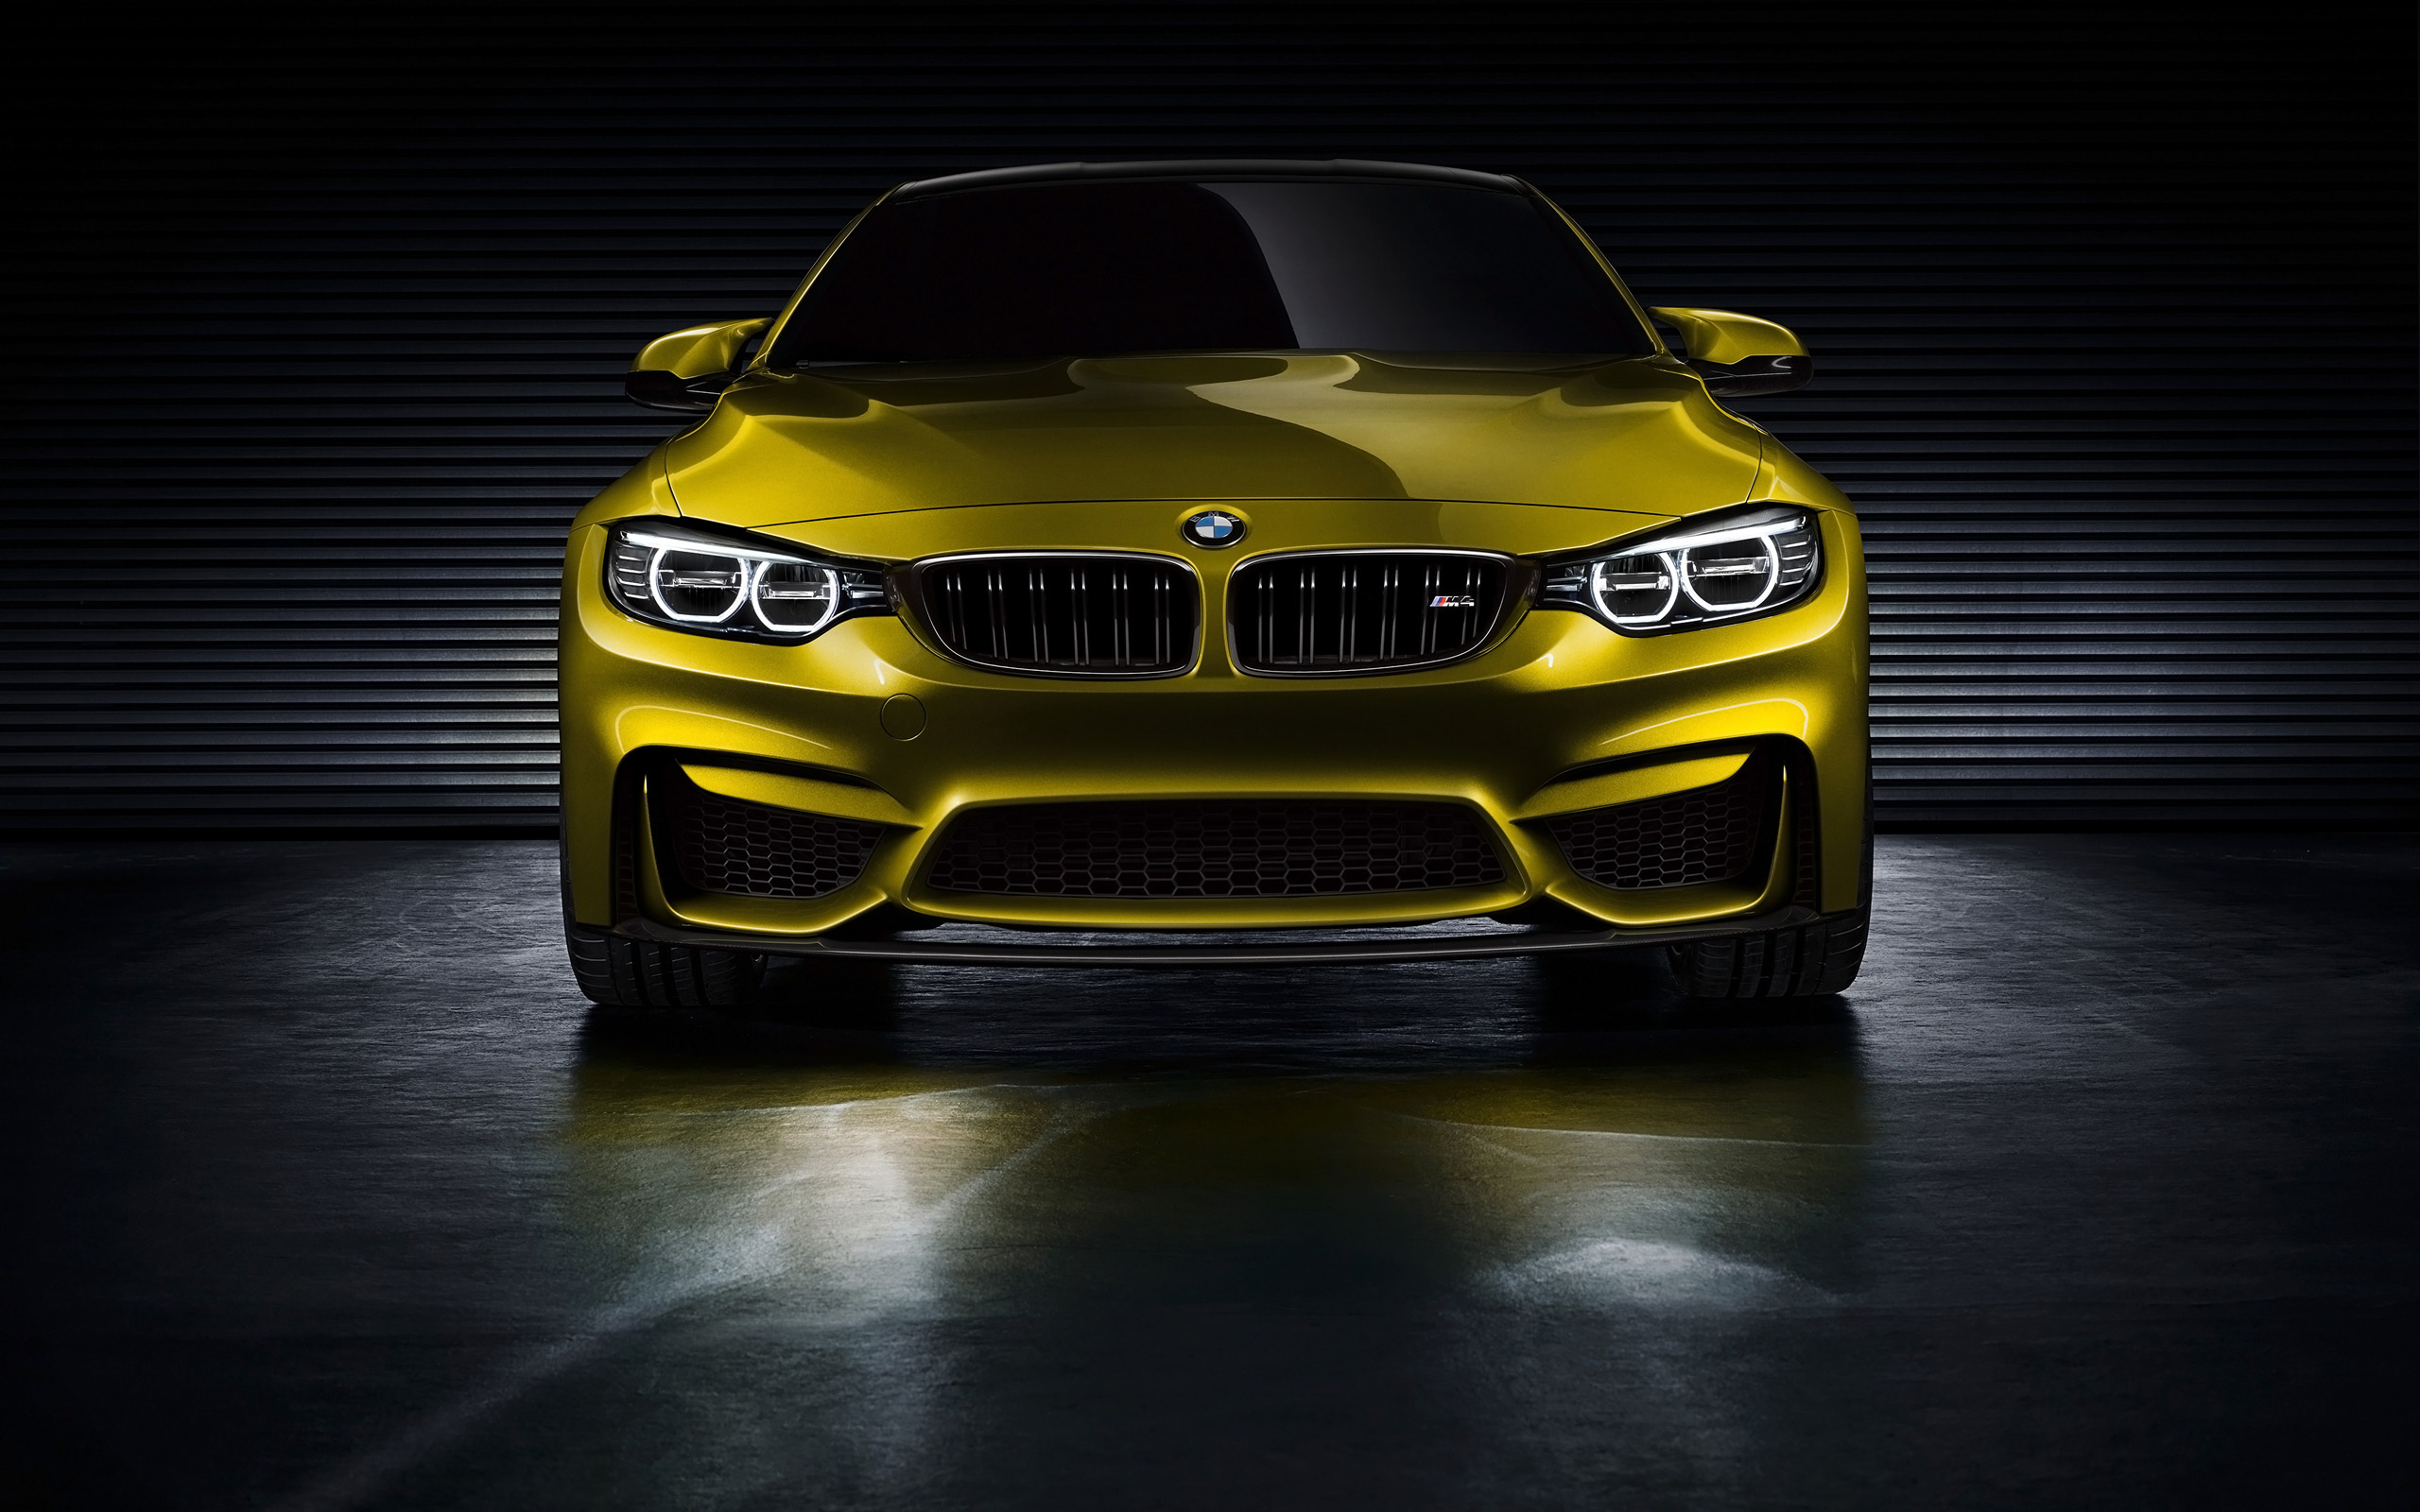 2013 BMW M4 Coupe Concept Wallpaper | HD Car Wallpapers | ID #3702